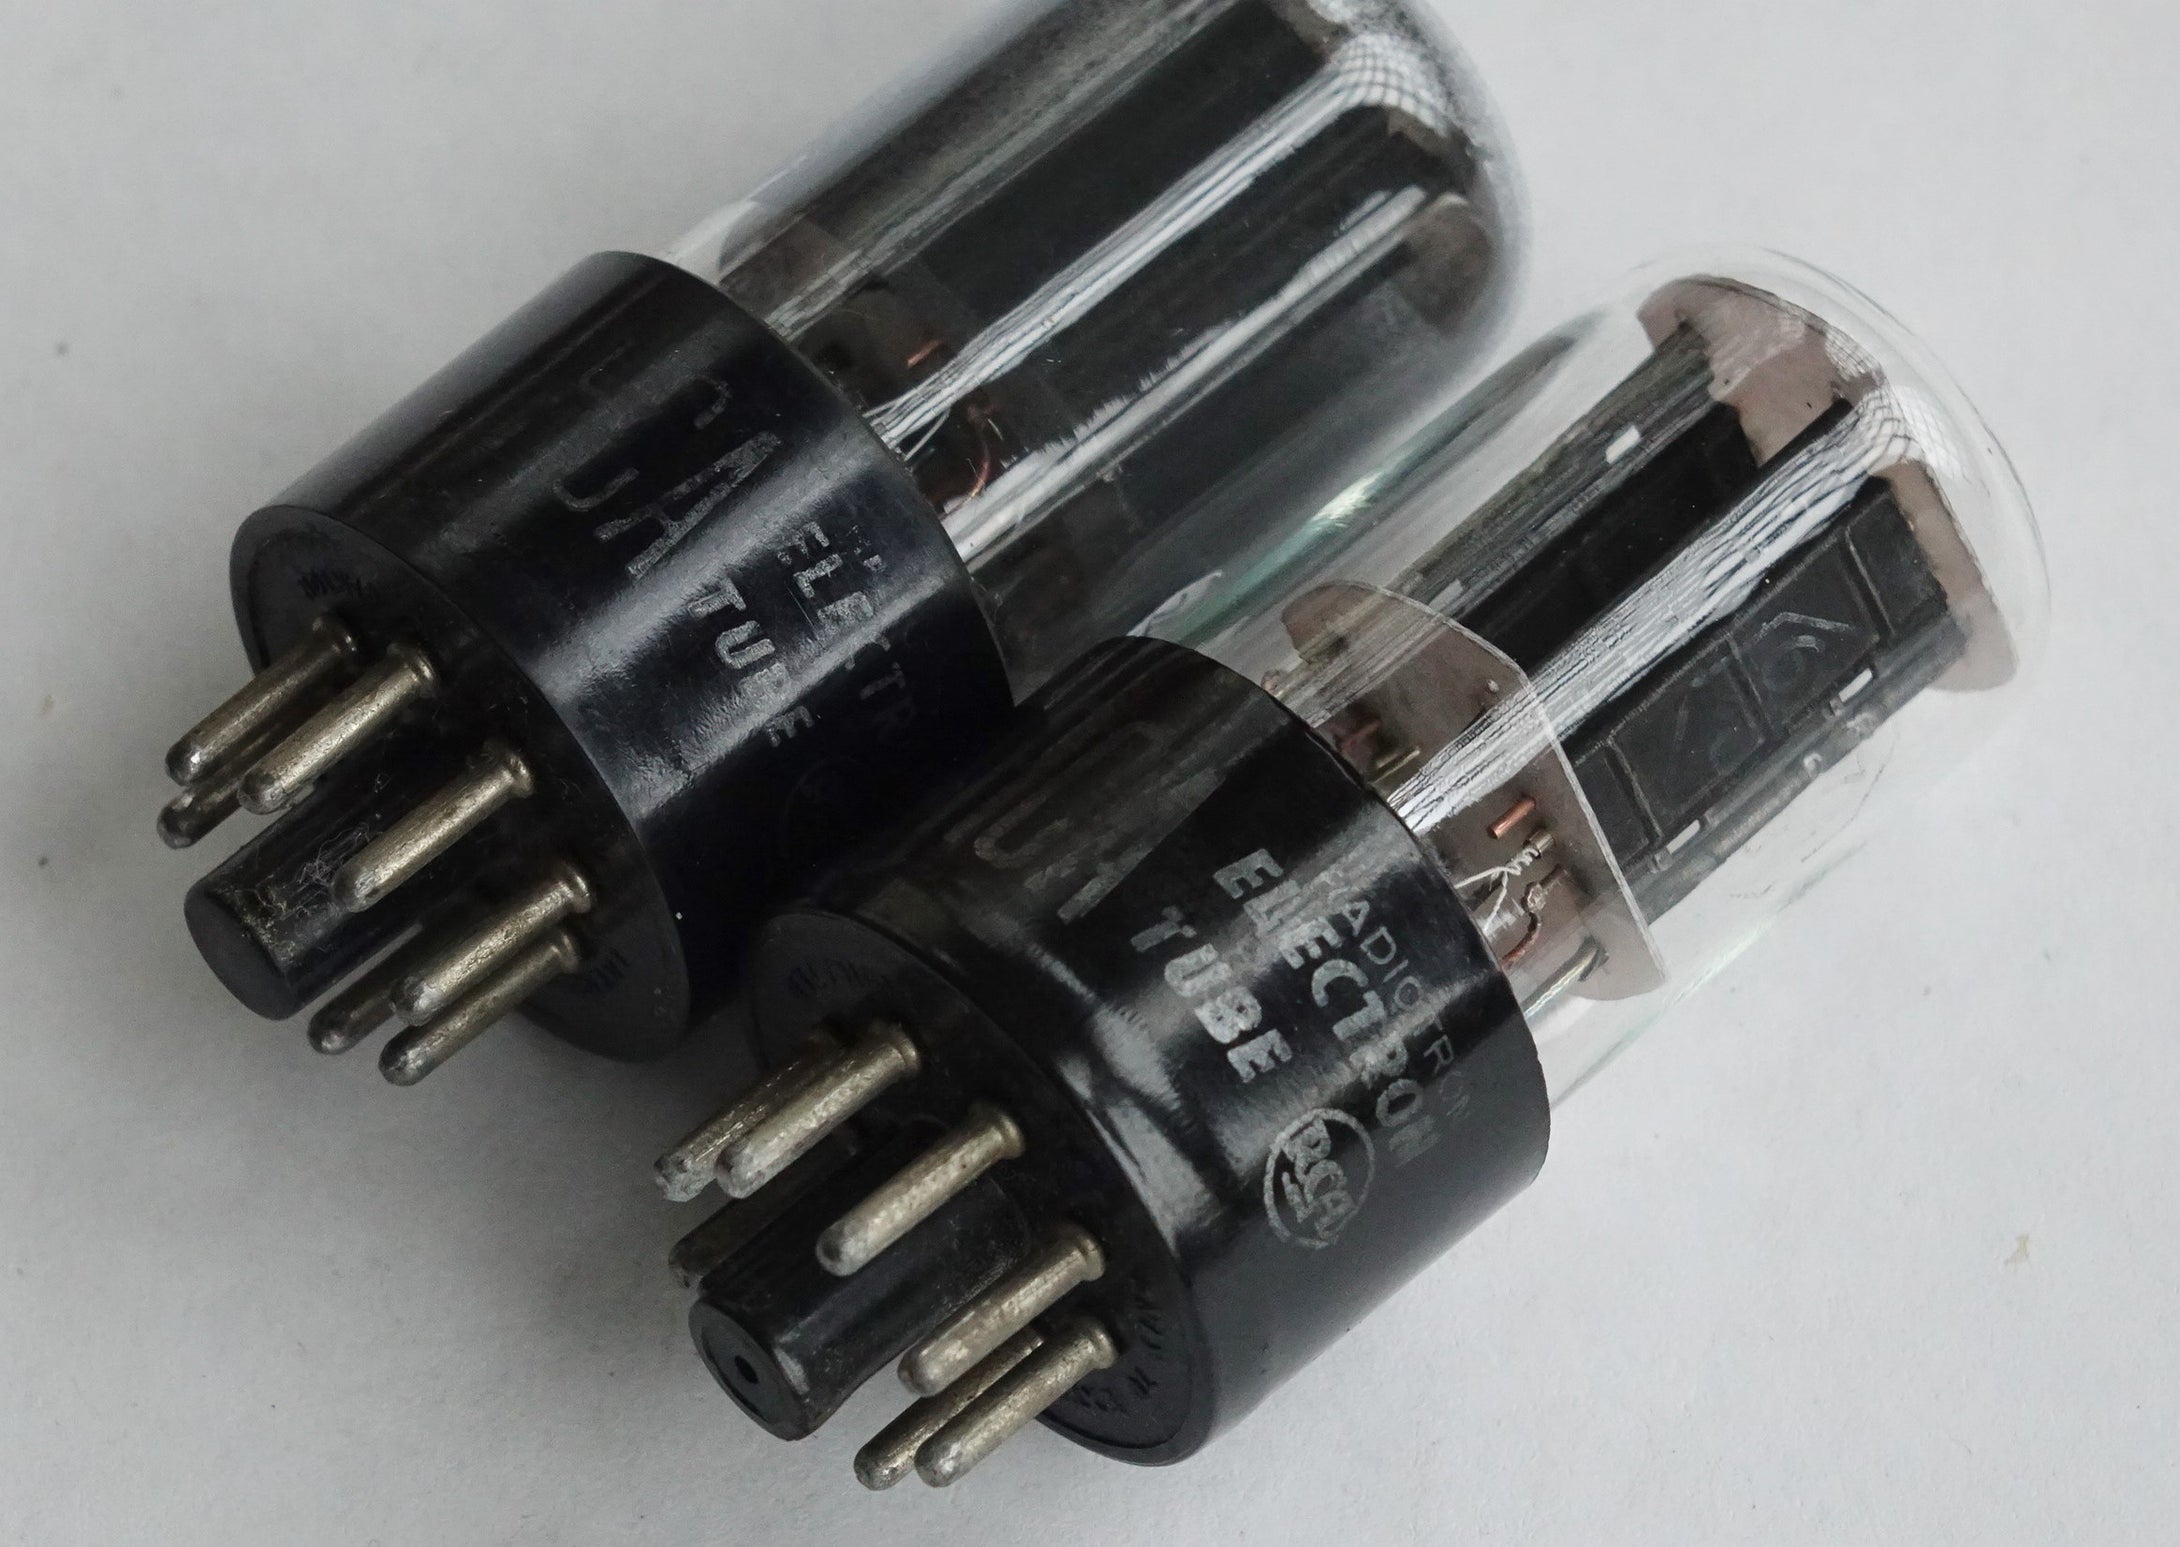 RCA101: Vintage RCA 6SN7 Matched Pair Tested Like New